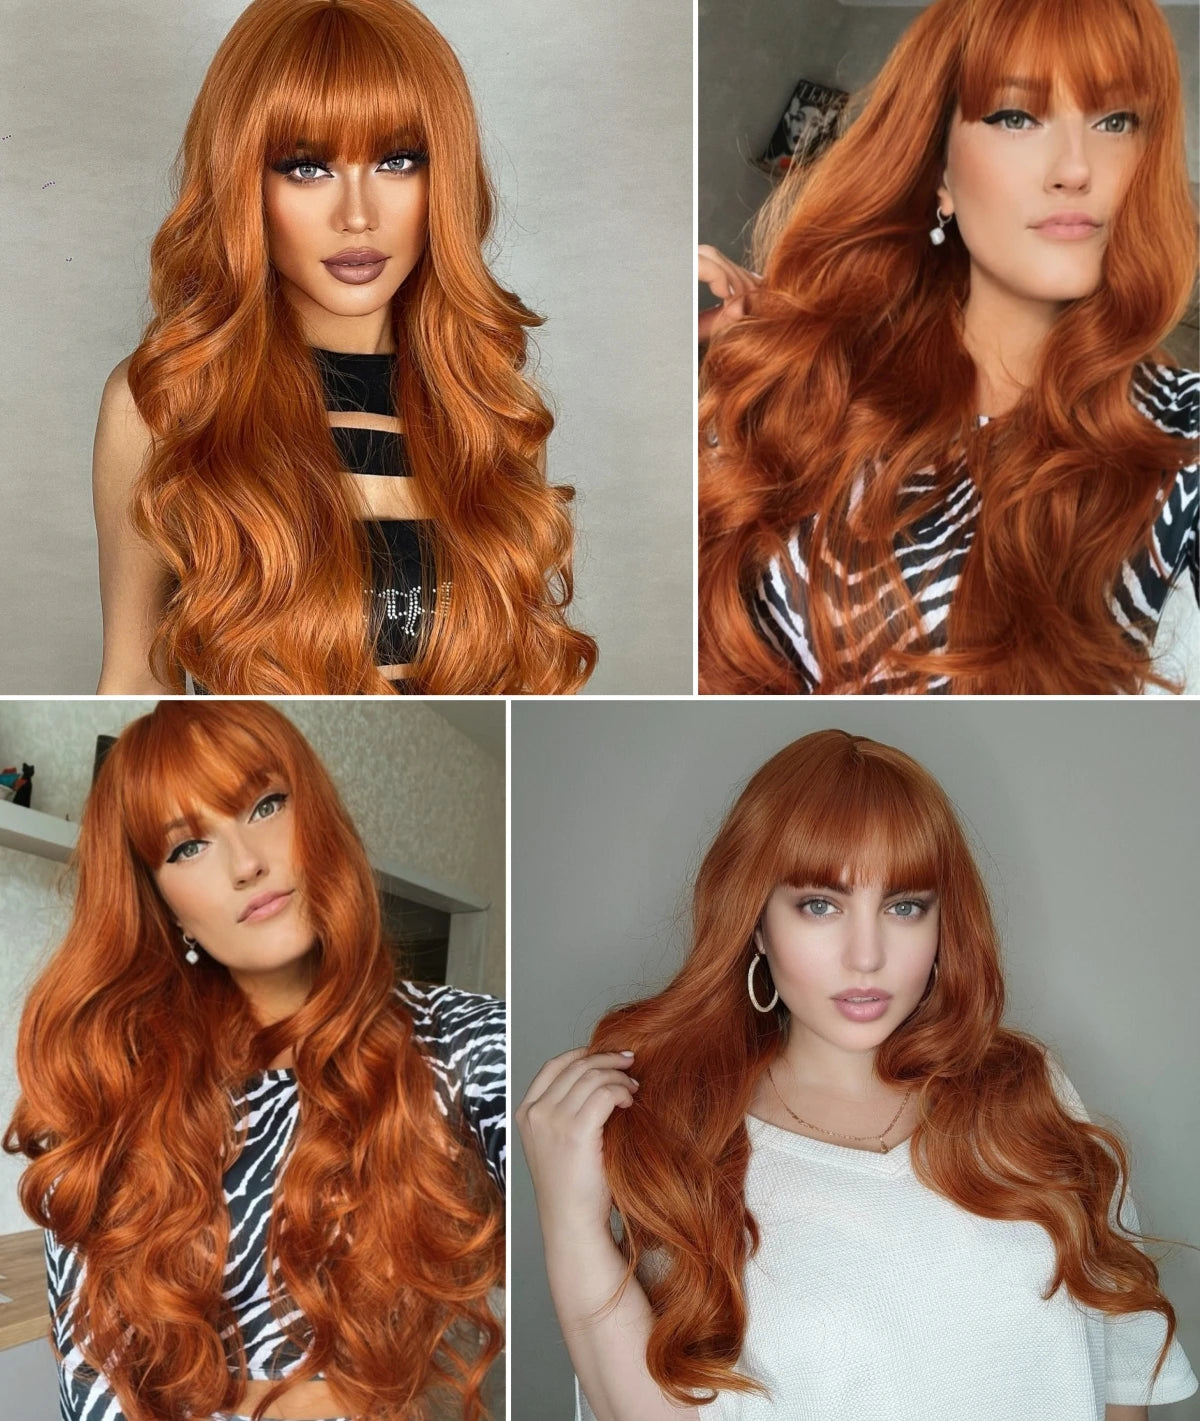 Long Orange Body Wave Synthetic Wig with Bangs for White Women Natural Looking Hair Daily Use Party Cosplay Heat Resistant Fiber